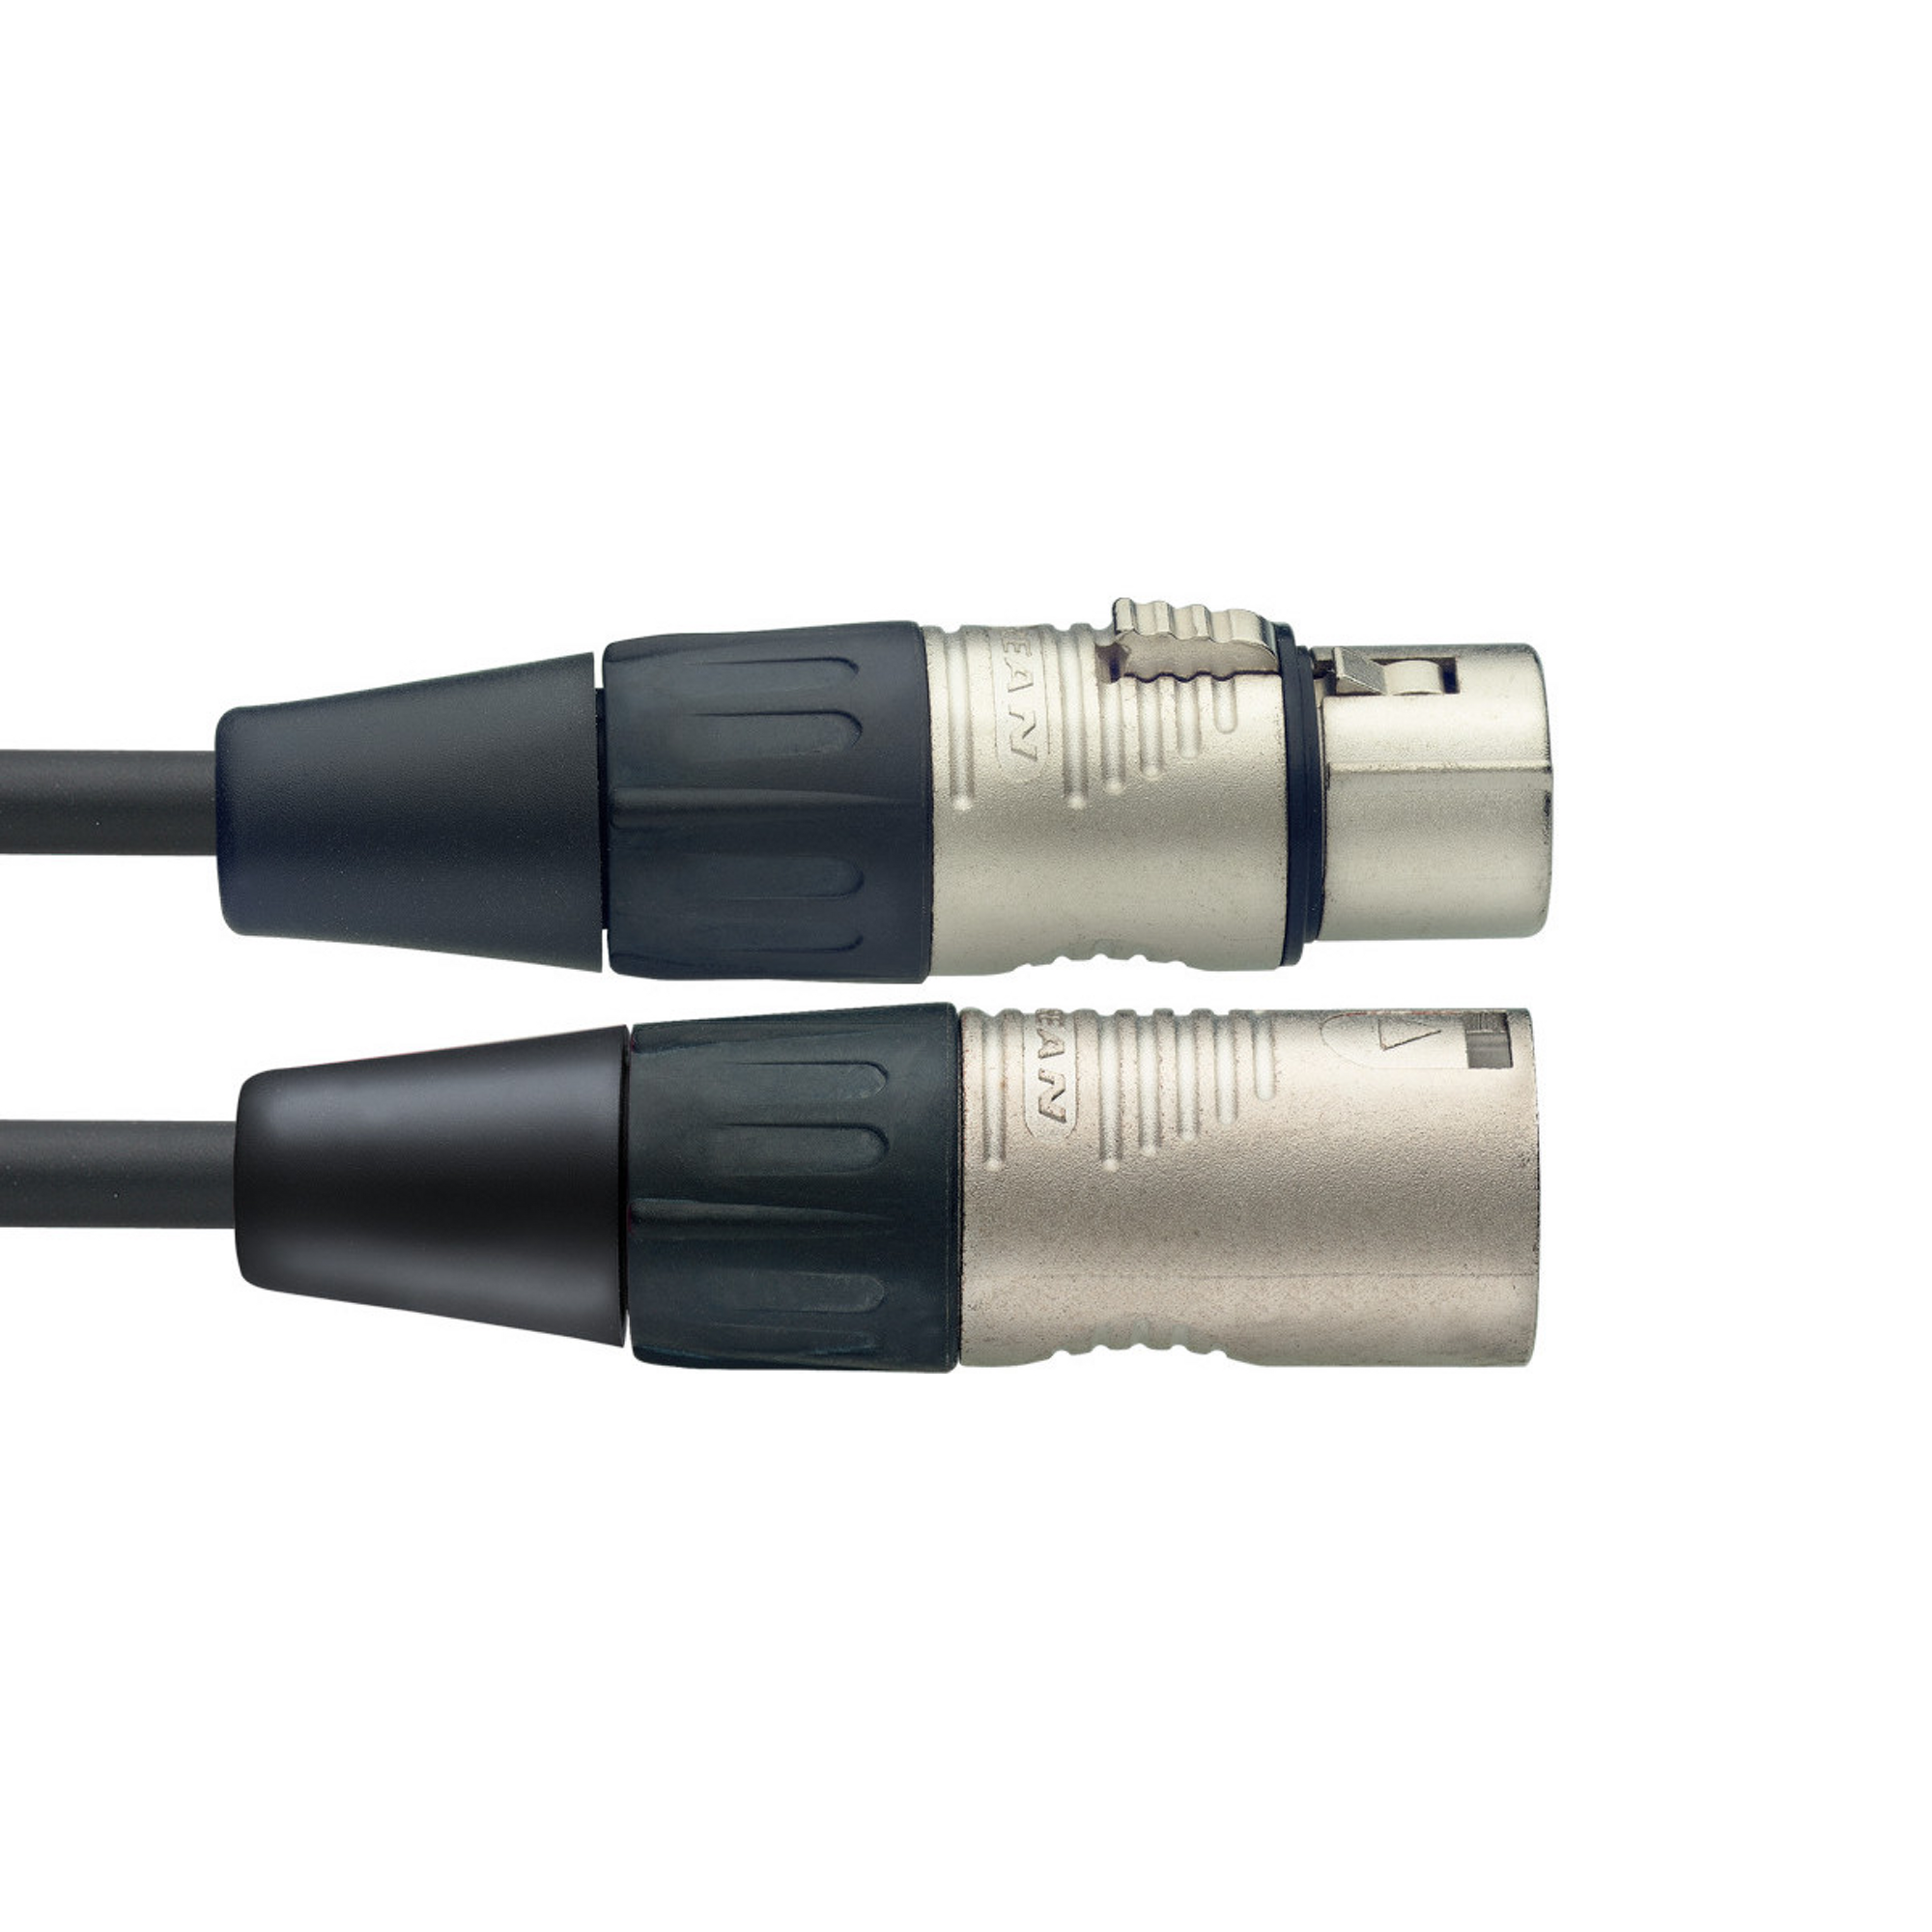 Xlr Microphone Cable 10m